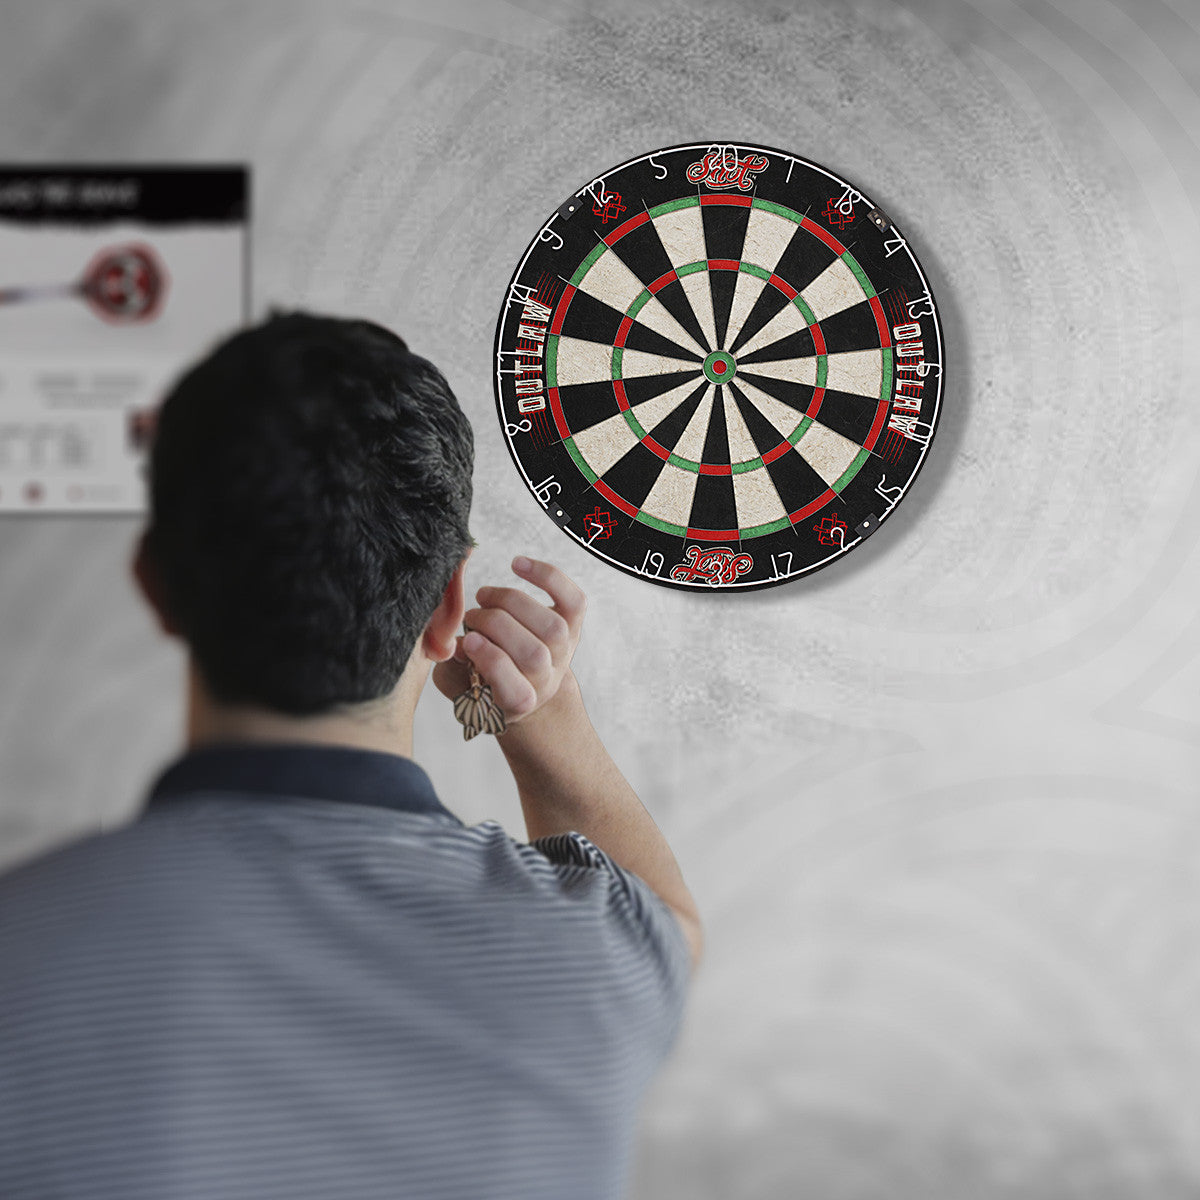 A starter for 5: basic dart games should know | 101, darts, how to and more | Shot Discover blog